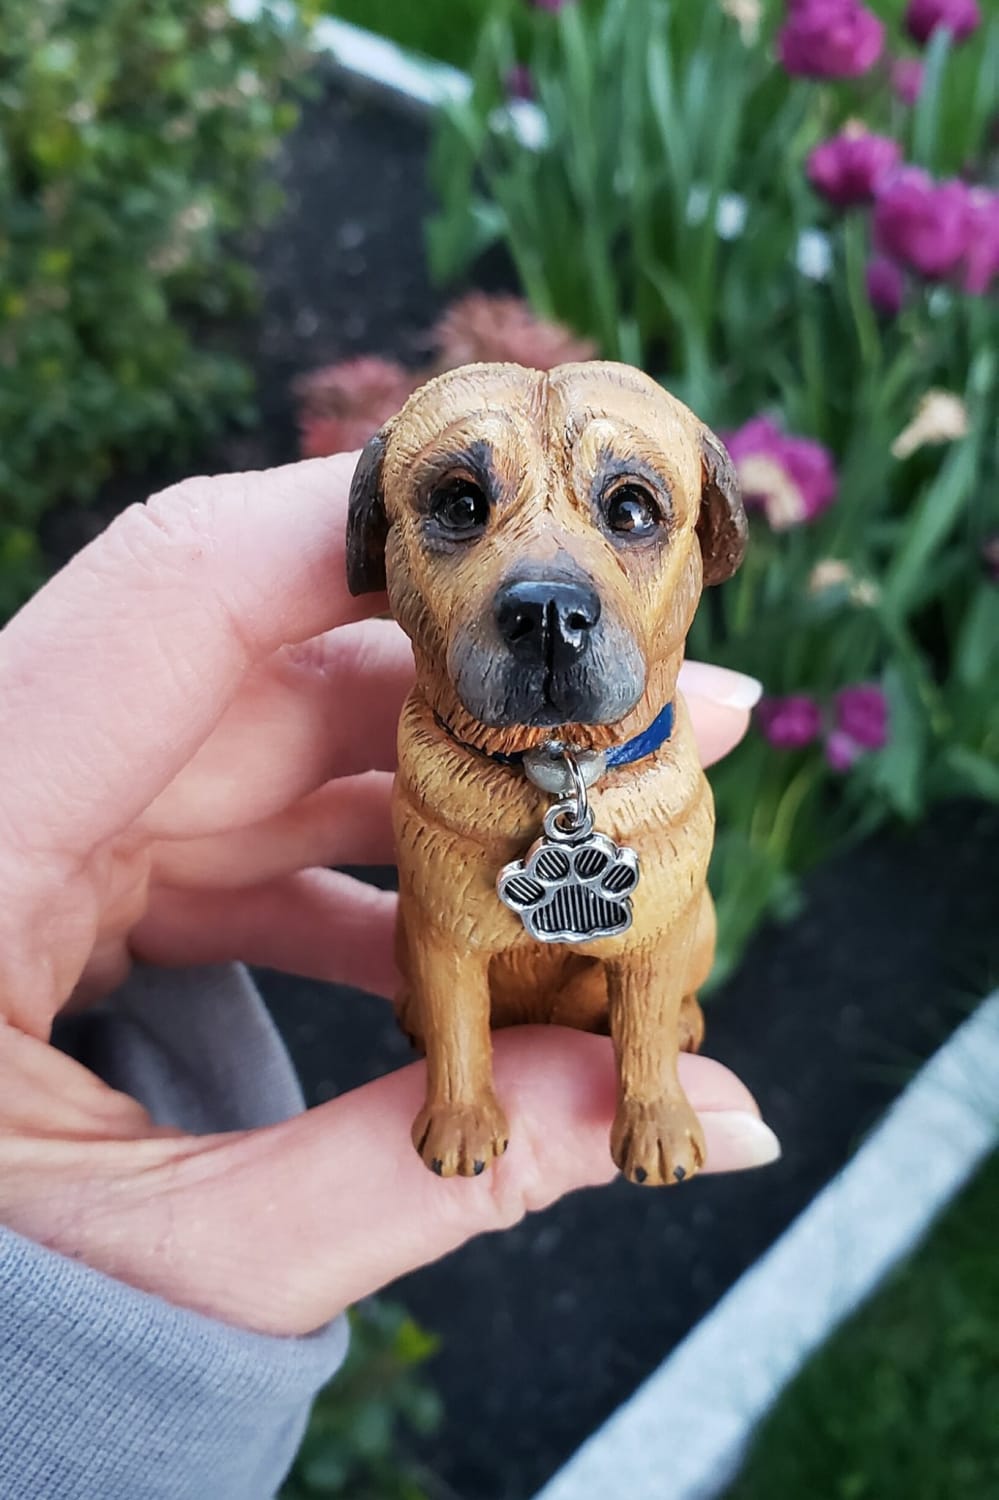 A custom pet sculpture that I made of a cute Rottweiler/Boxer mix, this good boy's name is Ace! 🐾